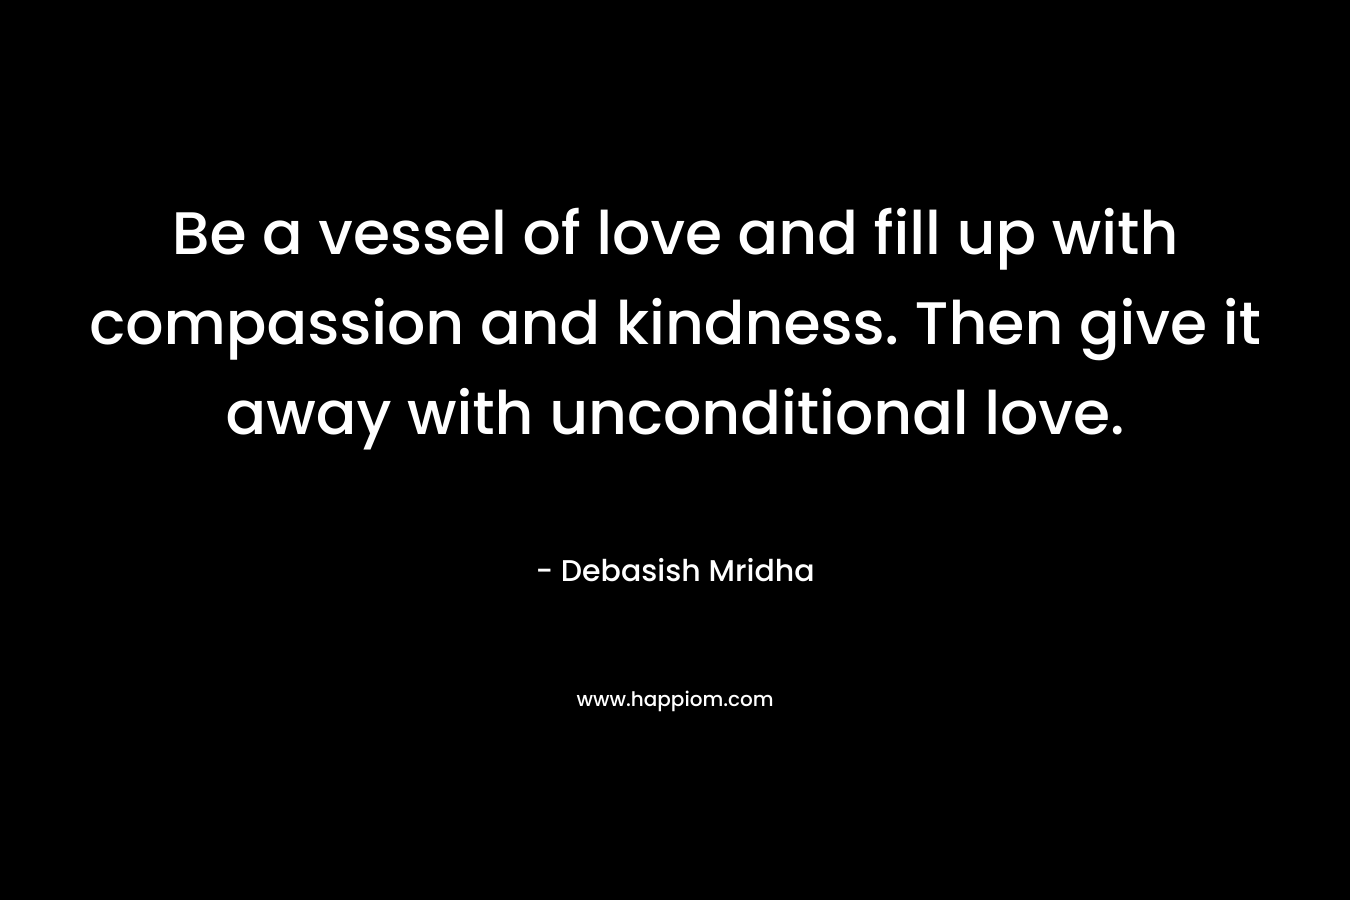 Be a vessel of love and fill up with compassion and kindness. Then give it away with unconditional love.